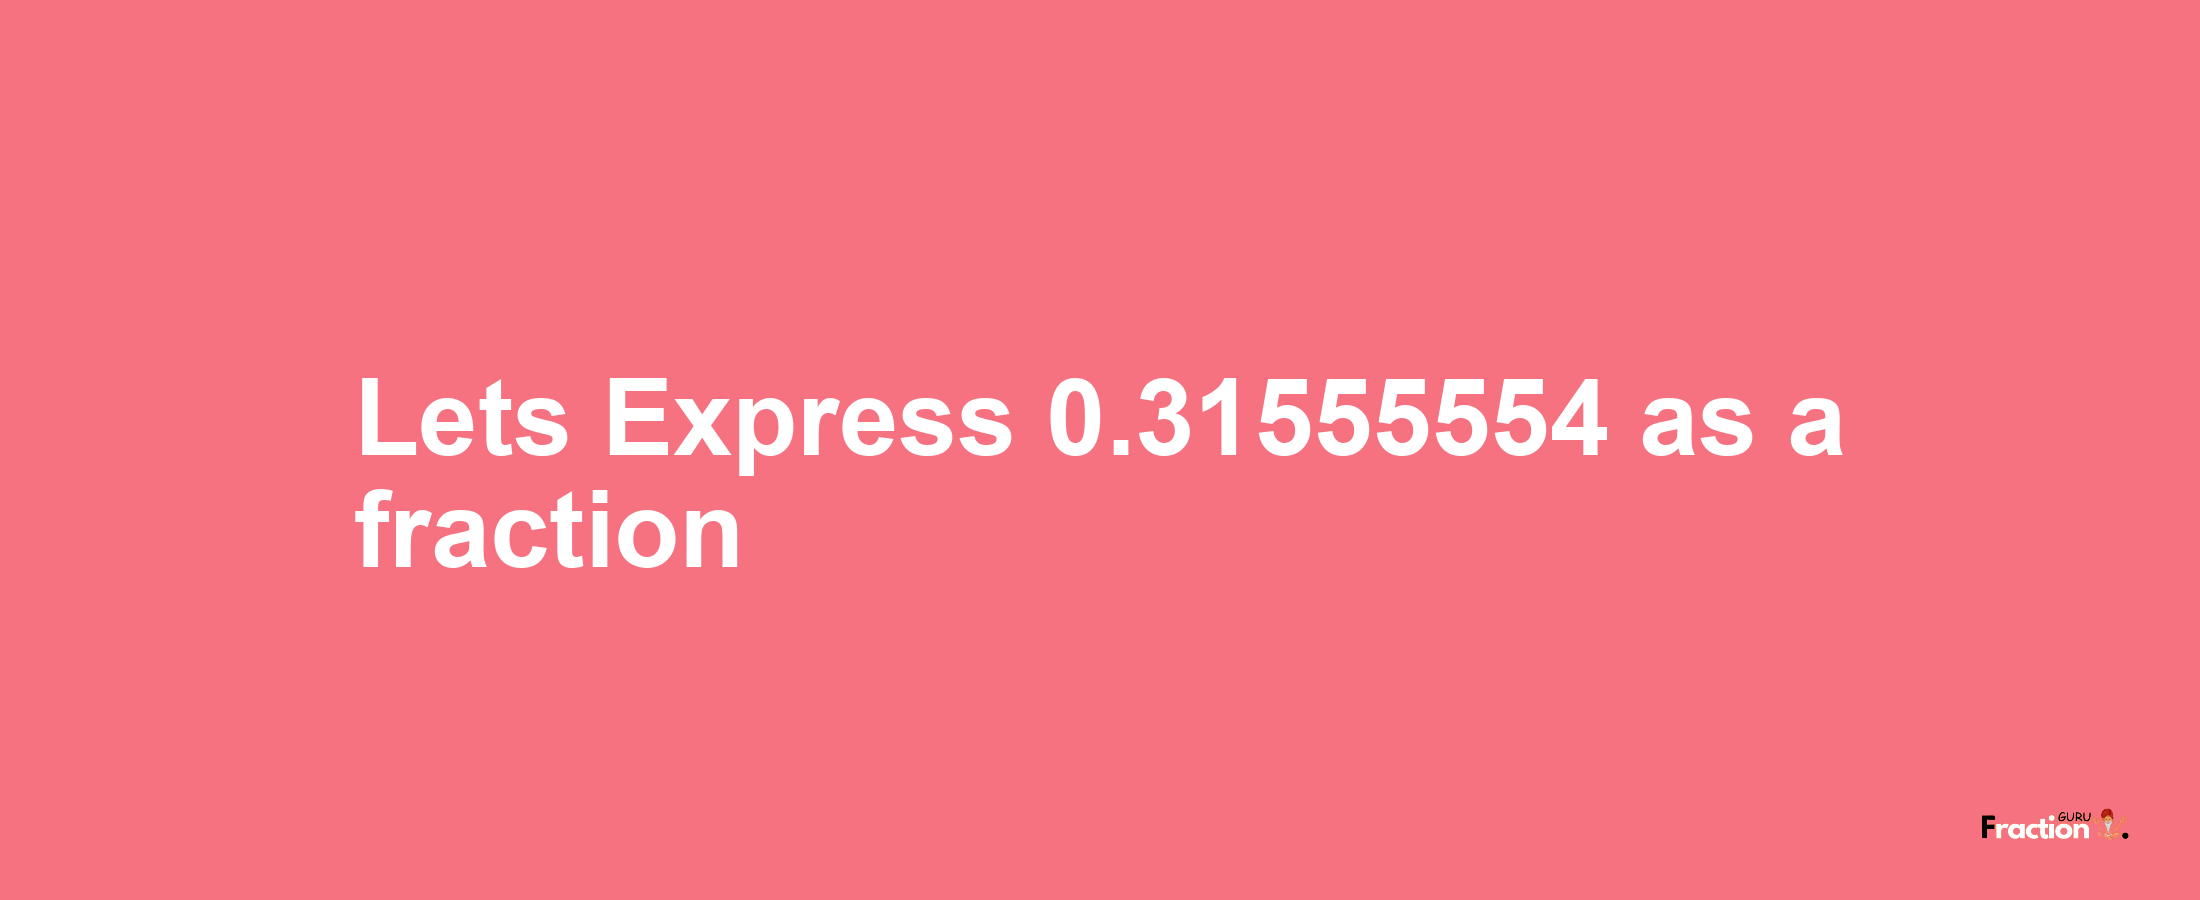 Lets Express 0.31555554 as afraction